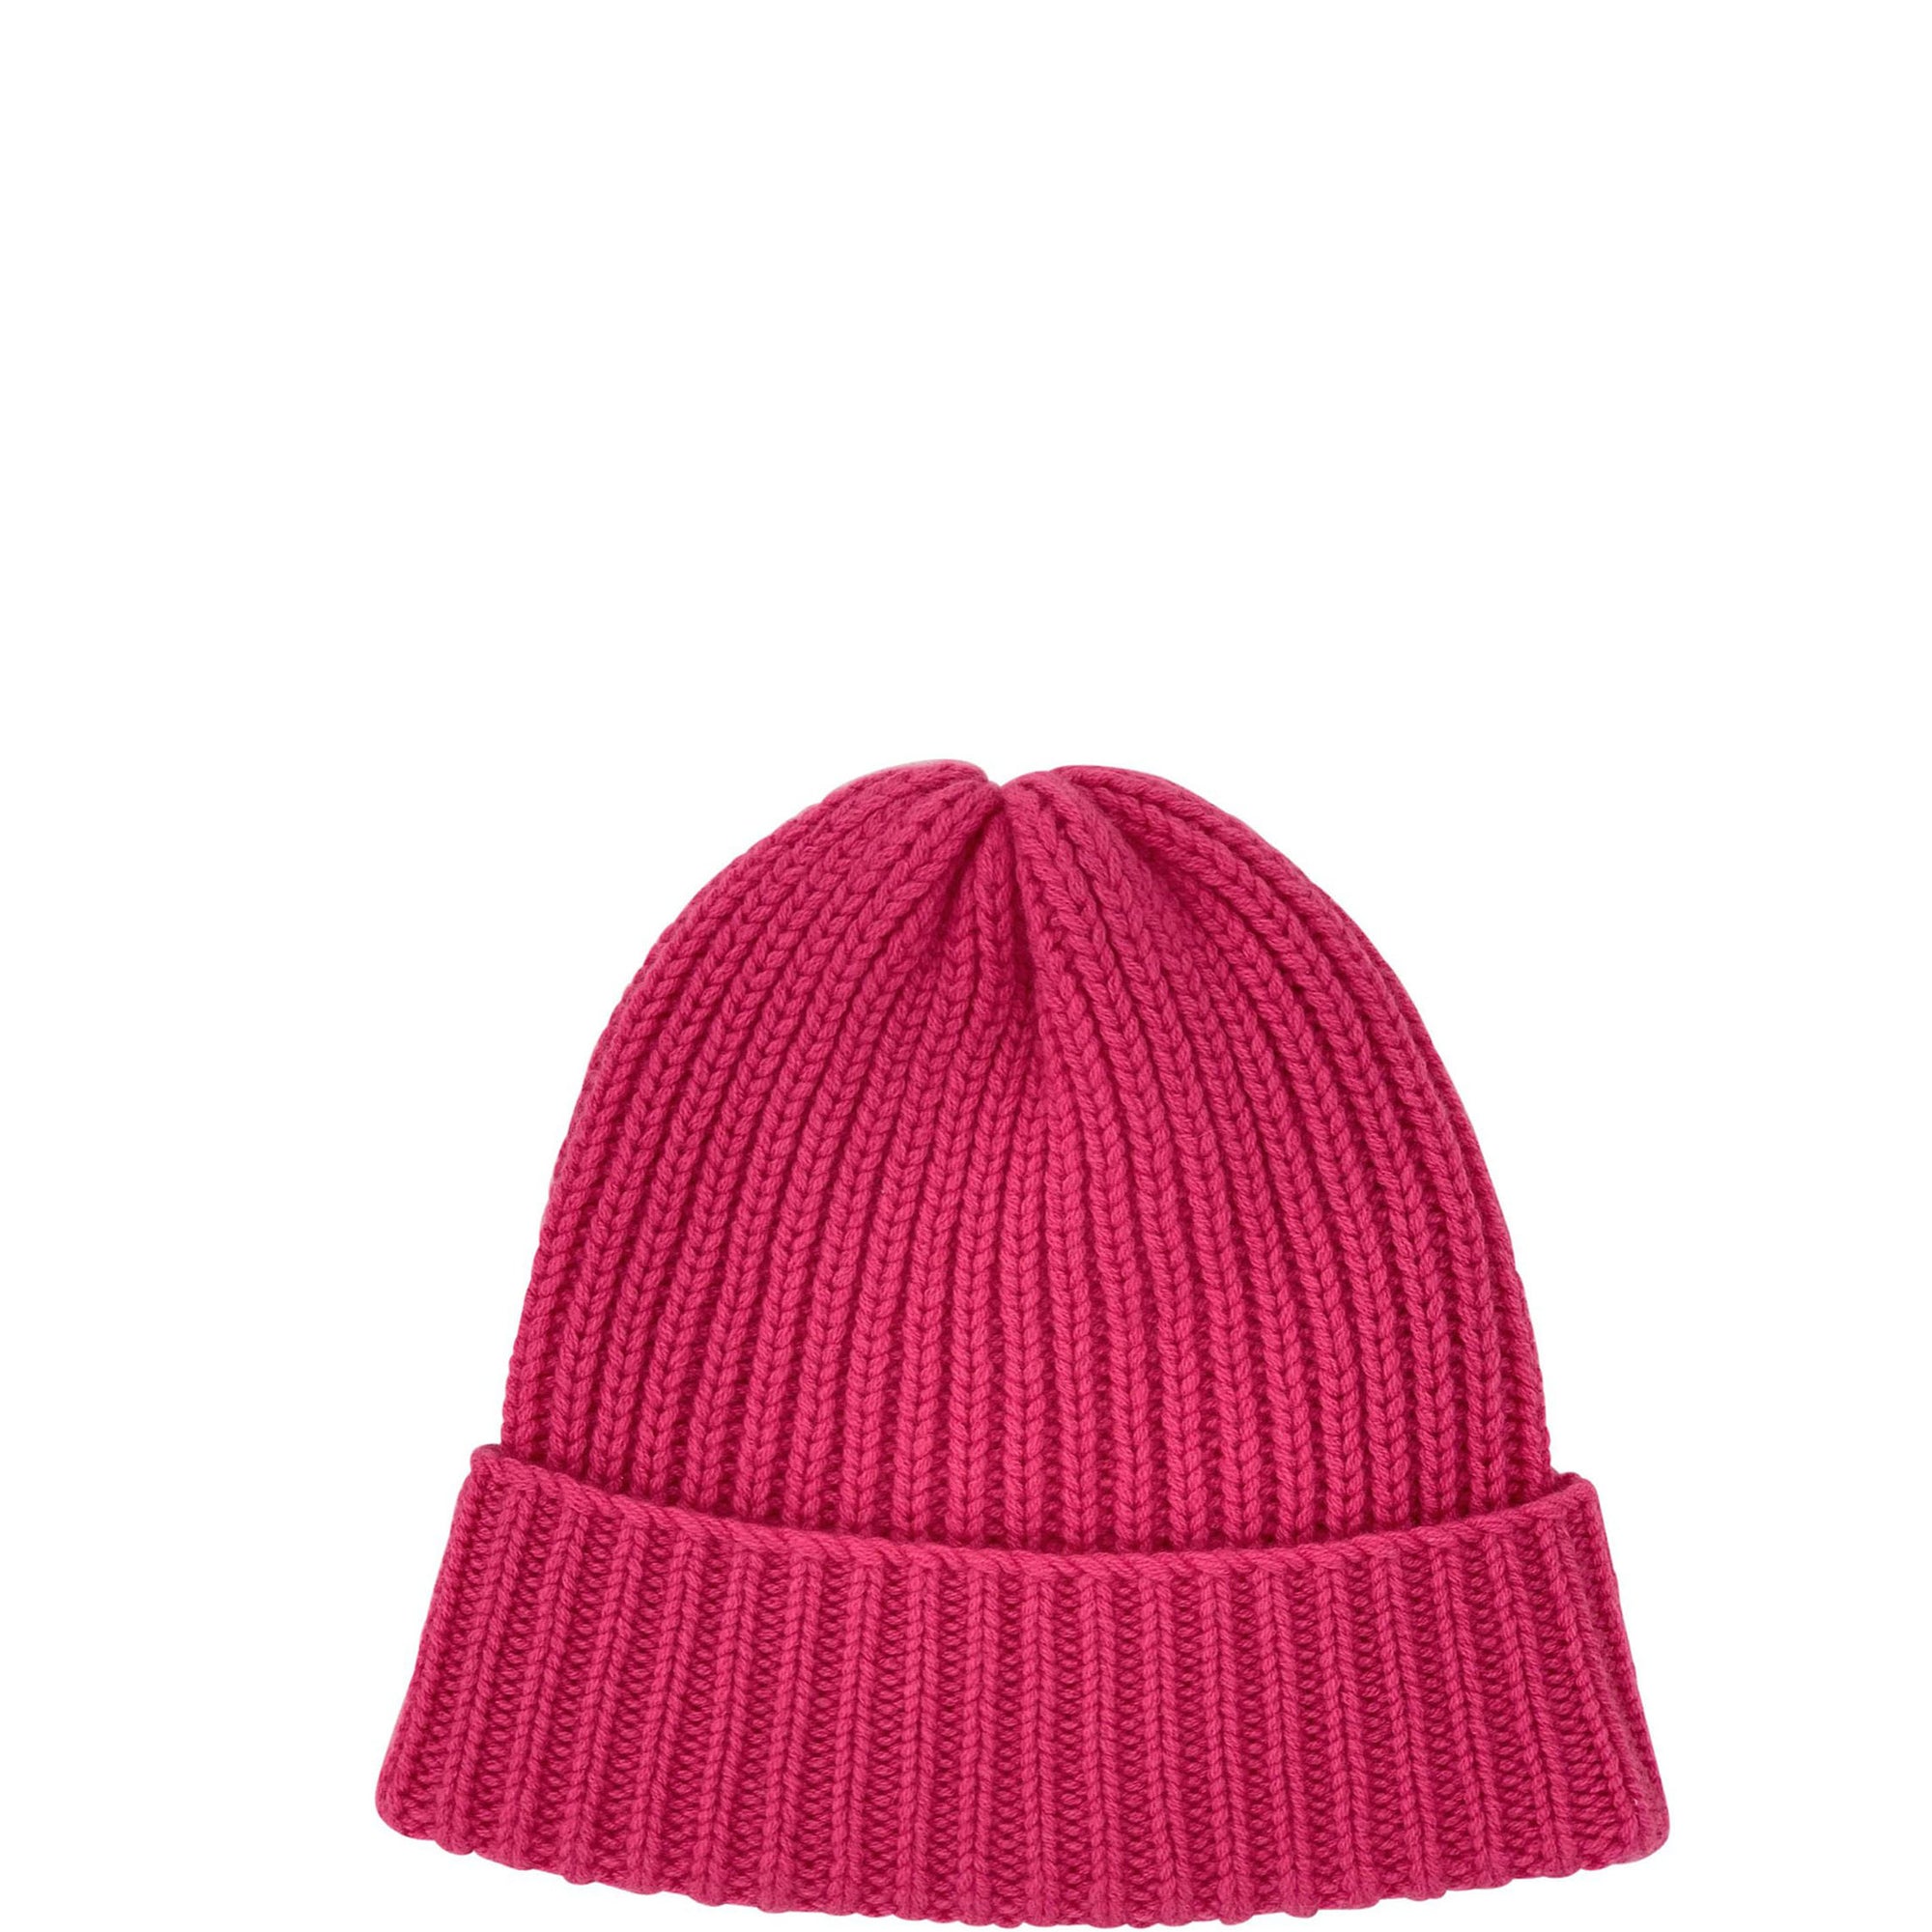 PETITE CALIN Kaschmir Mütze, Pink, Cashmere beanie, Sustainable cashmere, Kaschmir, Mütze, Handmade, Zero waste, Fair trade, Organic, Handcrafted, Handmade, Made in Europe, Made in Germany, Female Empowerment, Shop now - the wearness online-shop - ETHICAL & SUSTAINABLE LUXURY FASHION 